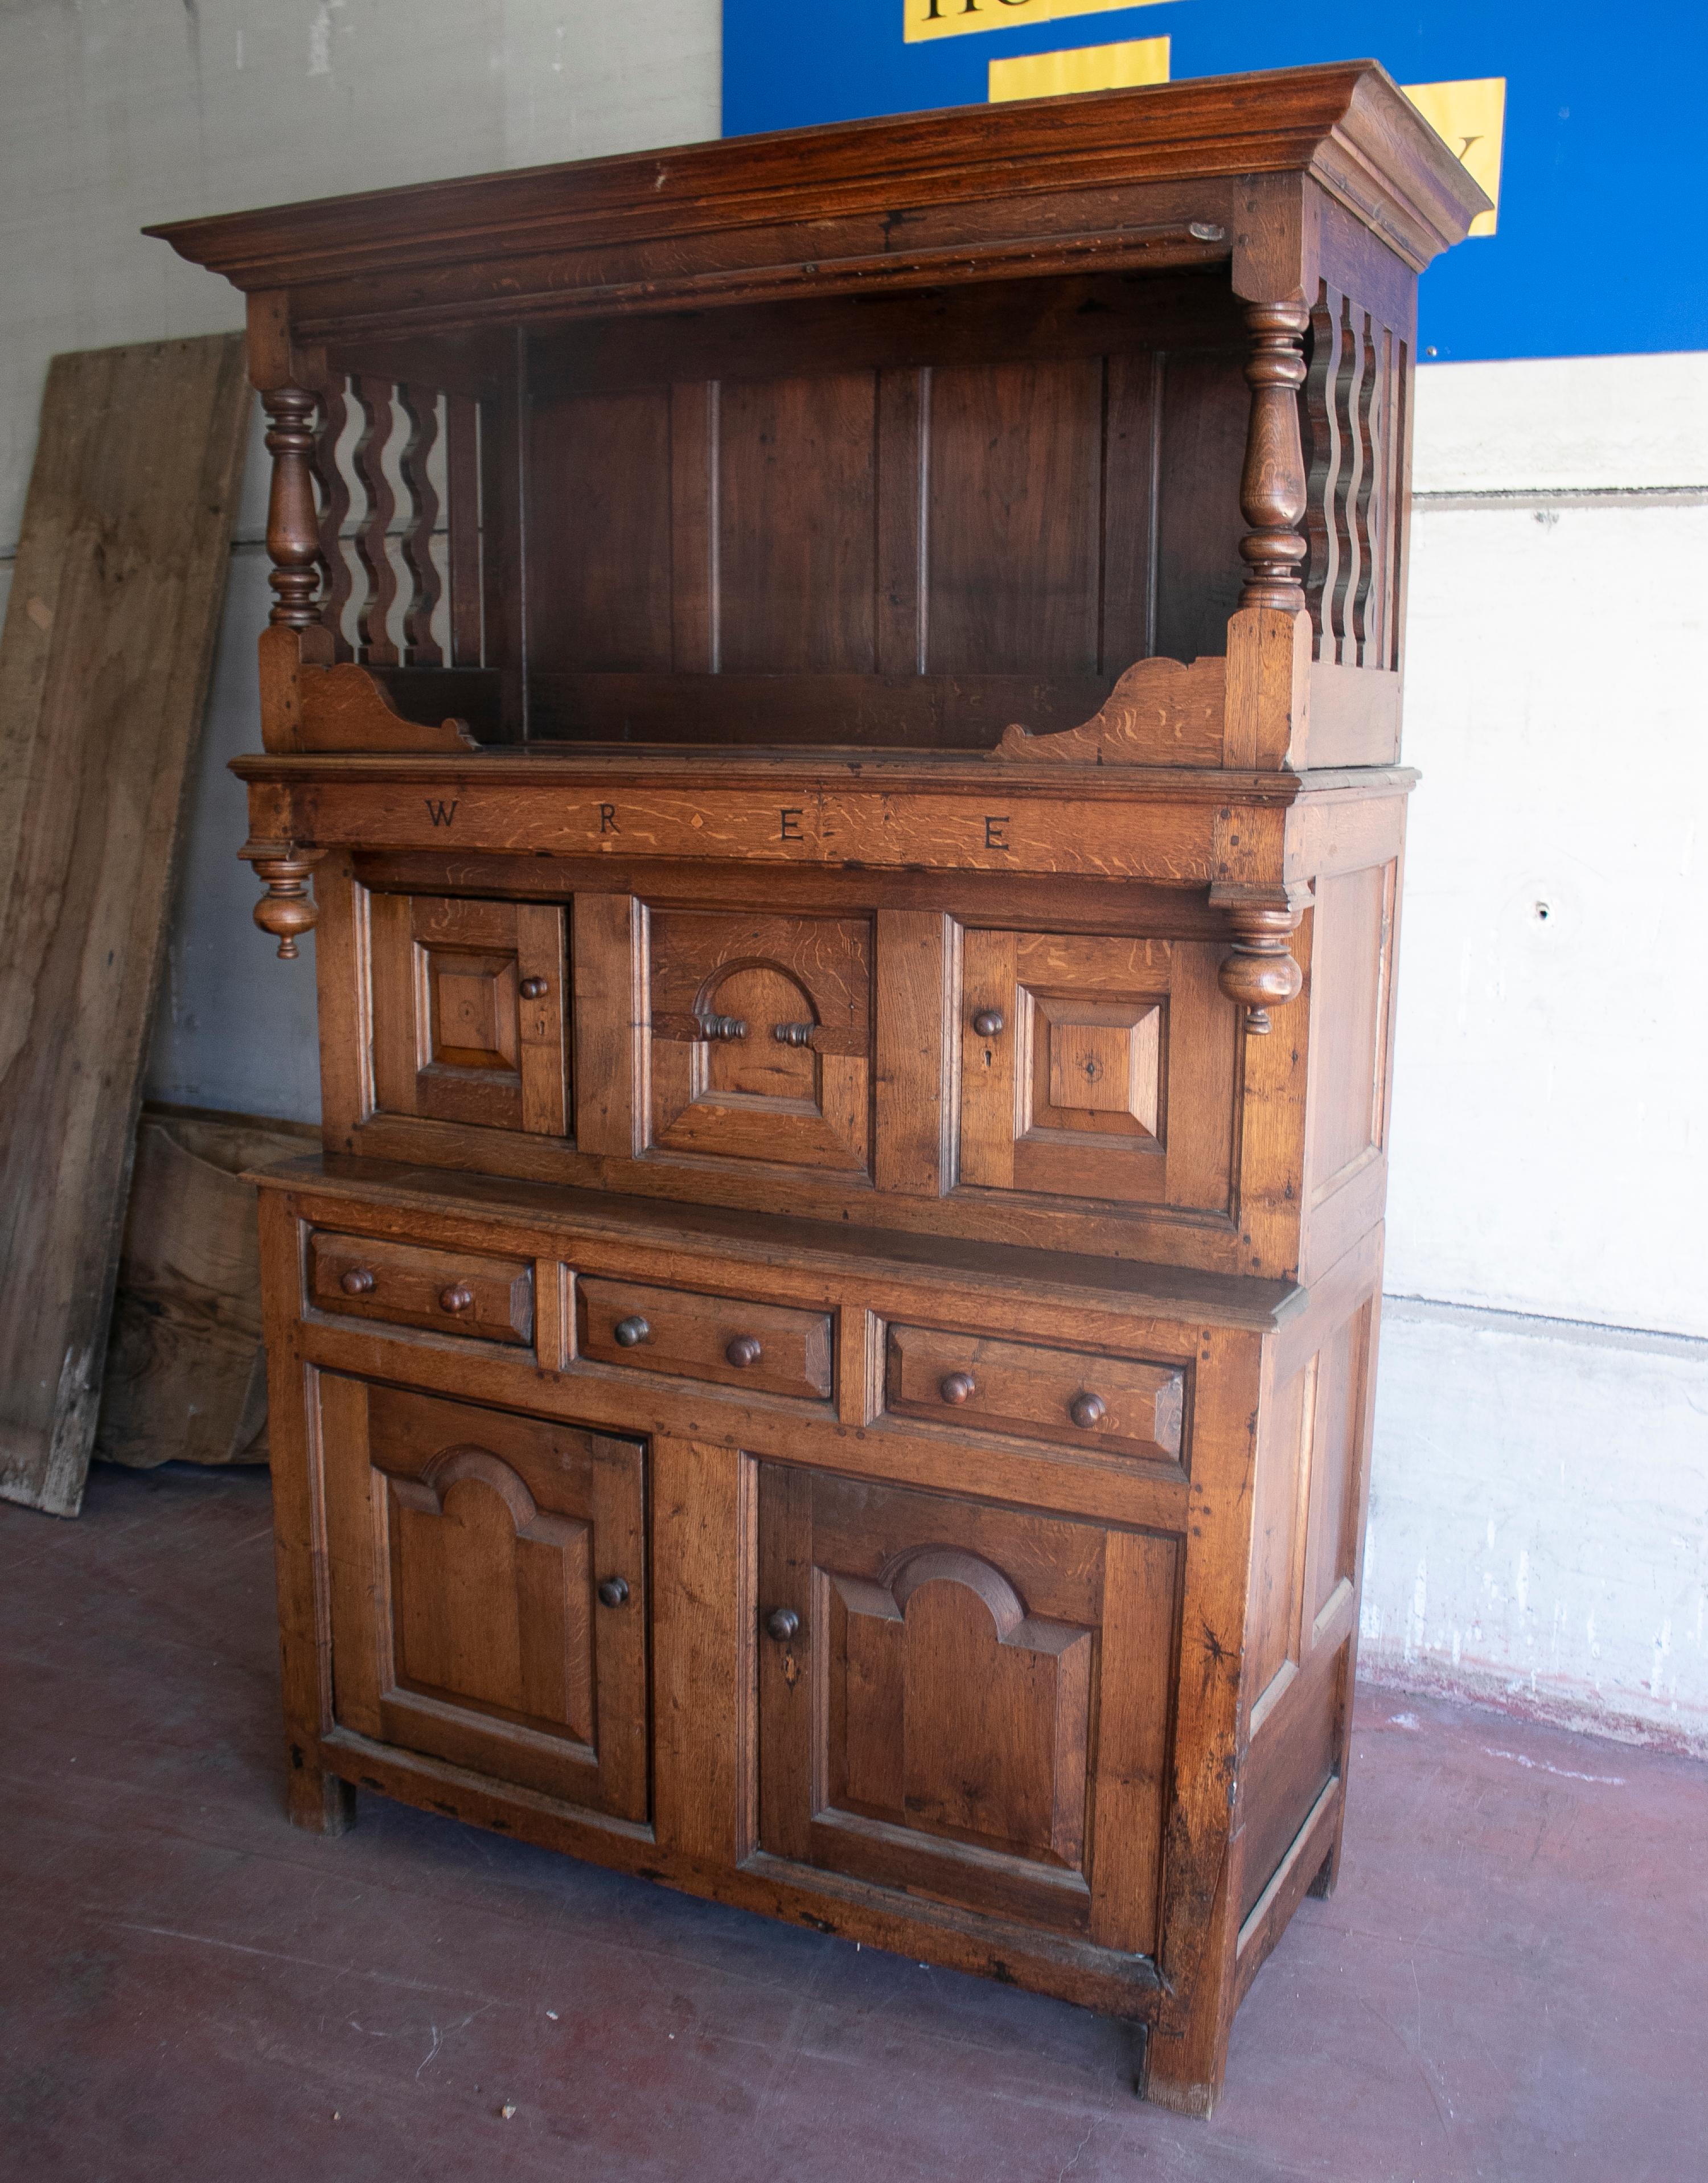 18th century German court cupboard with drawer, paneled doors and carved letters spelling WREE.
  